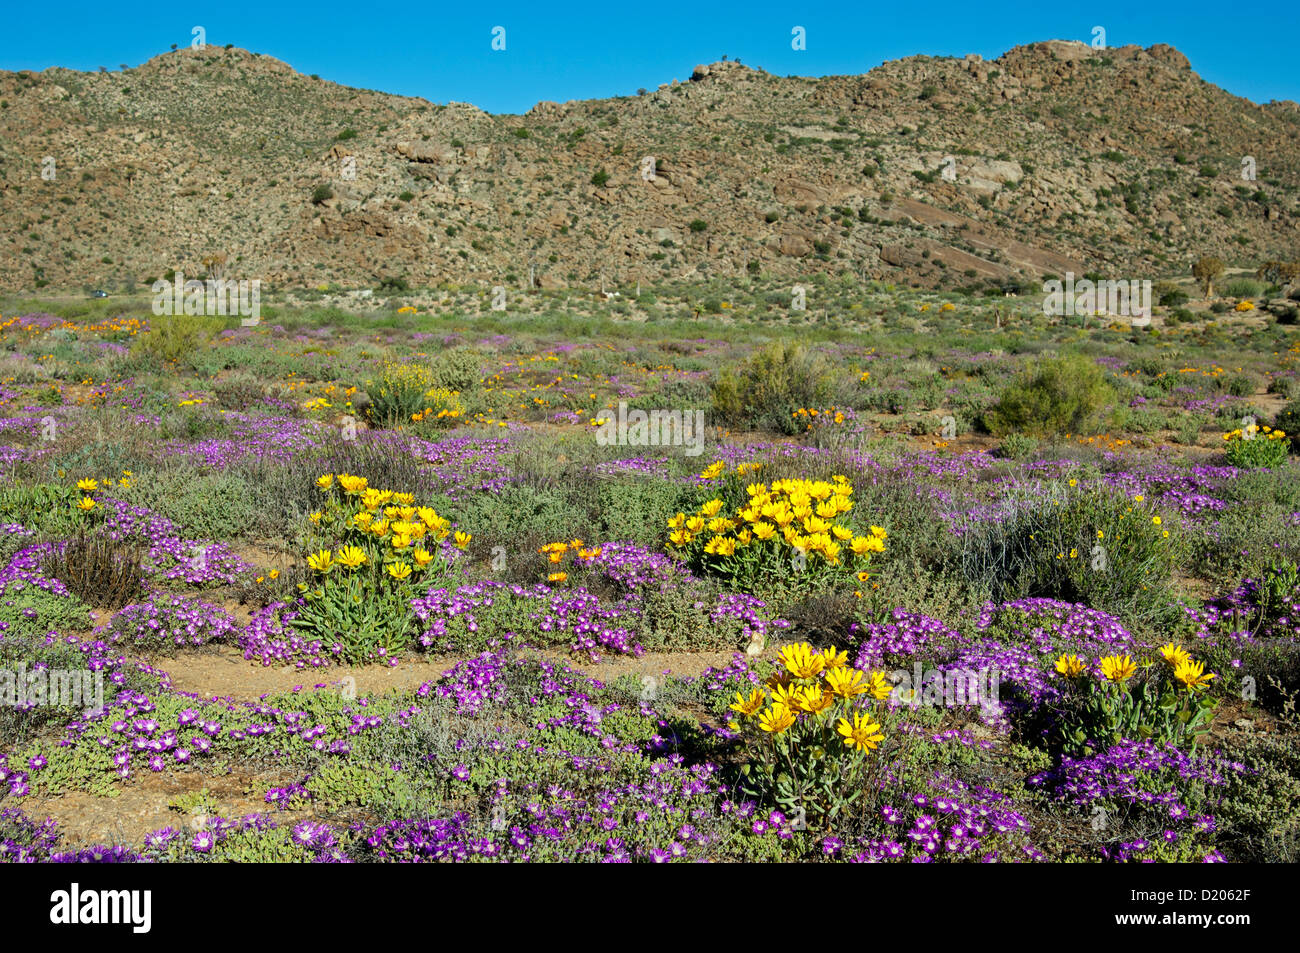 Spring display of flowers in the Goegap Nature Reserve, Namaqualand, South Africa Stock Photo